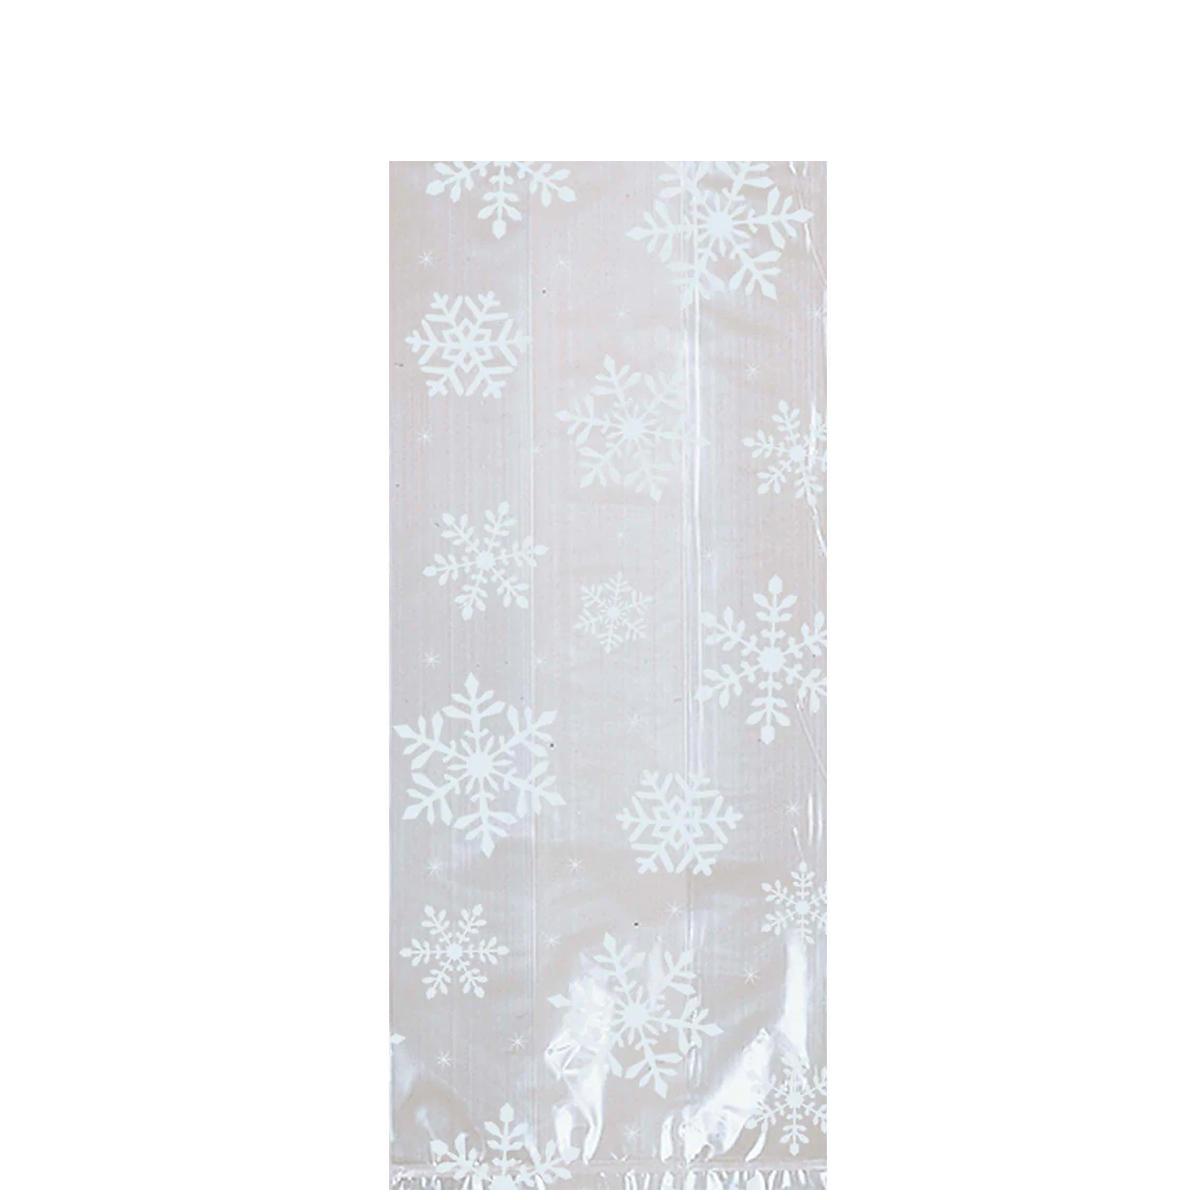 White Snowflakes Cello Party Bags Small 20pcs Party Favors - Party Centre